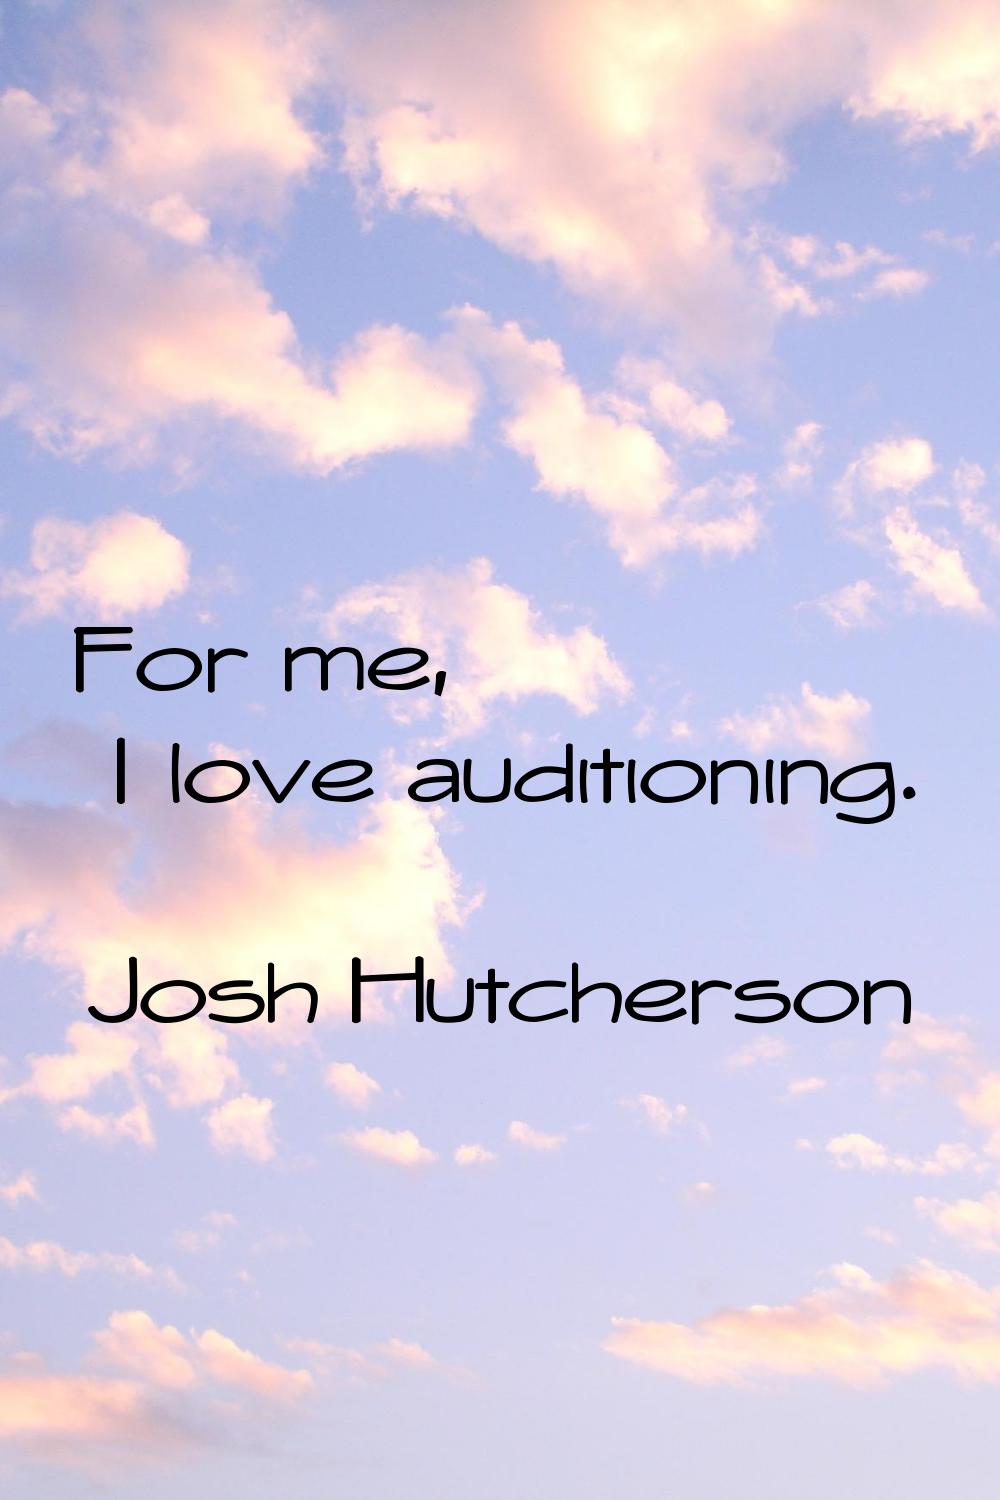 For me, I love auditioning.